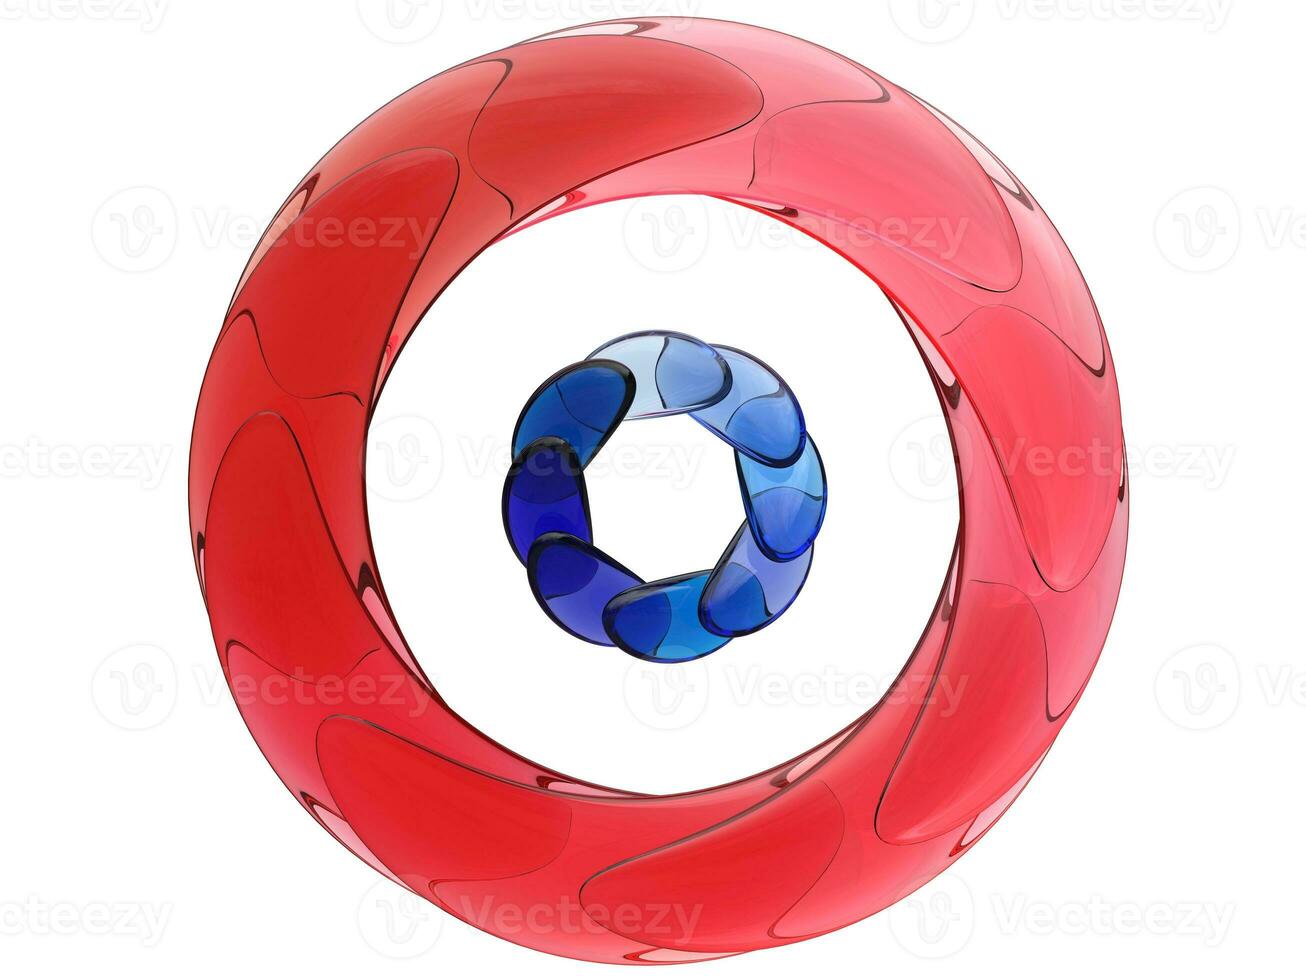 Abstract circular glass design in red and blue photo